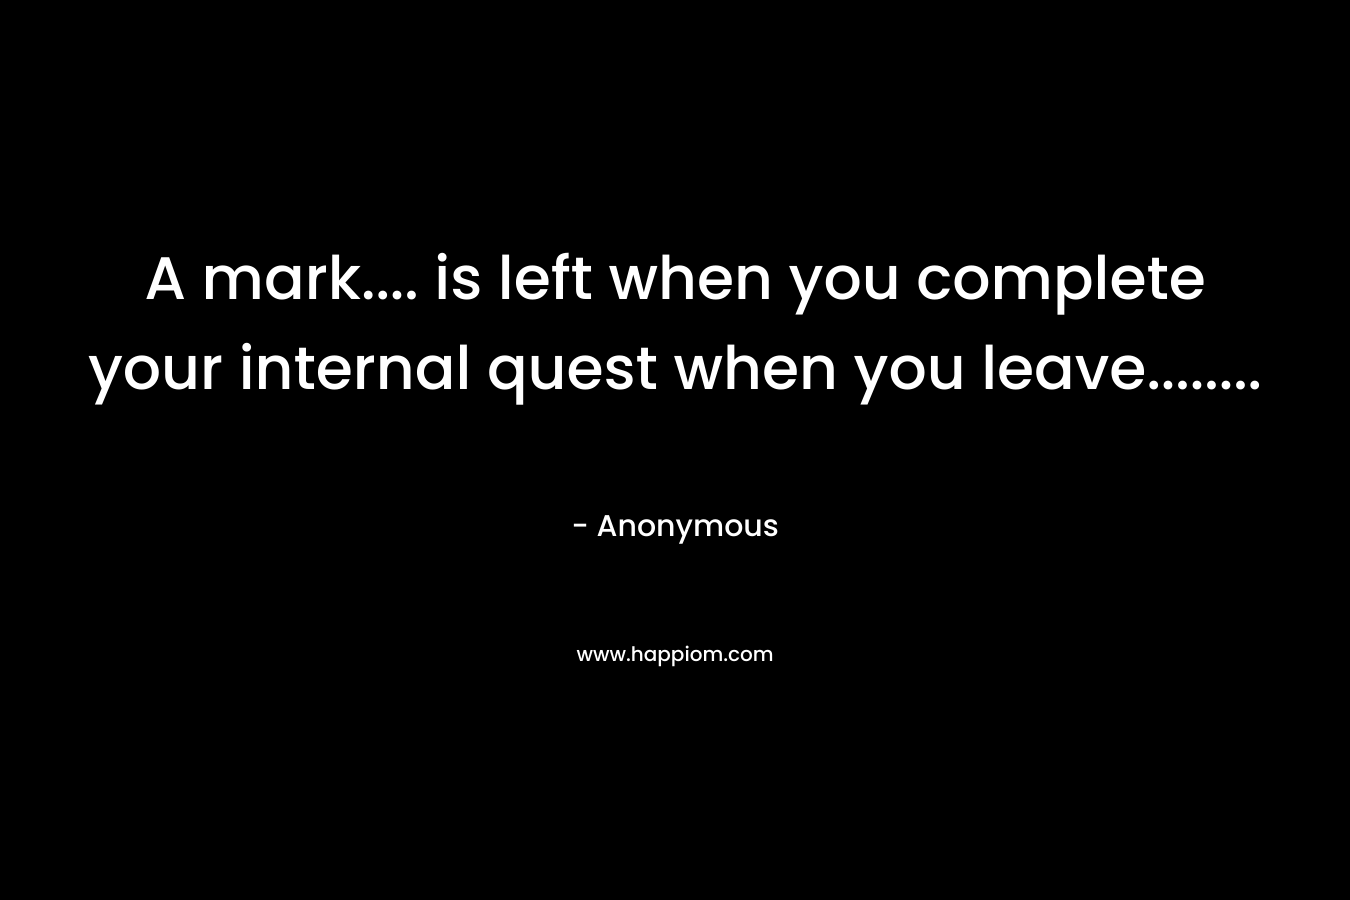 A mark.... is left when you complete your internal quest when you leave........